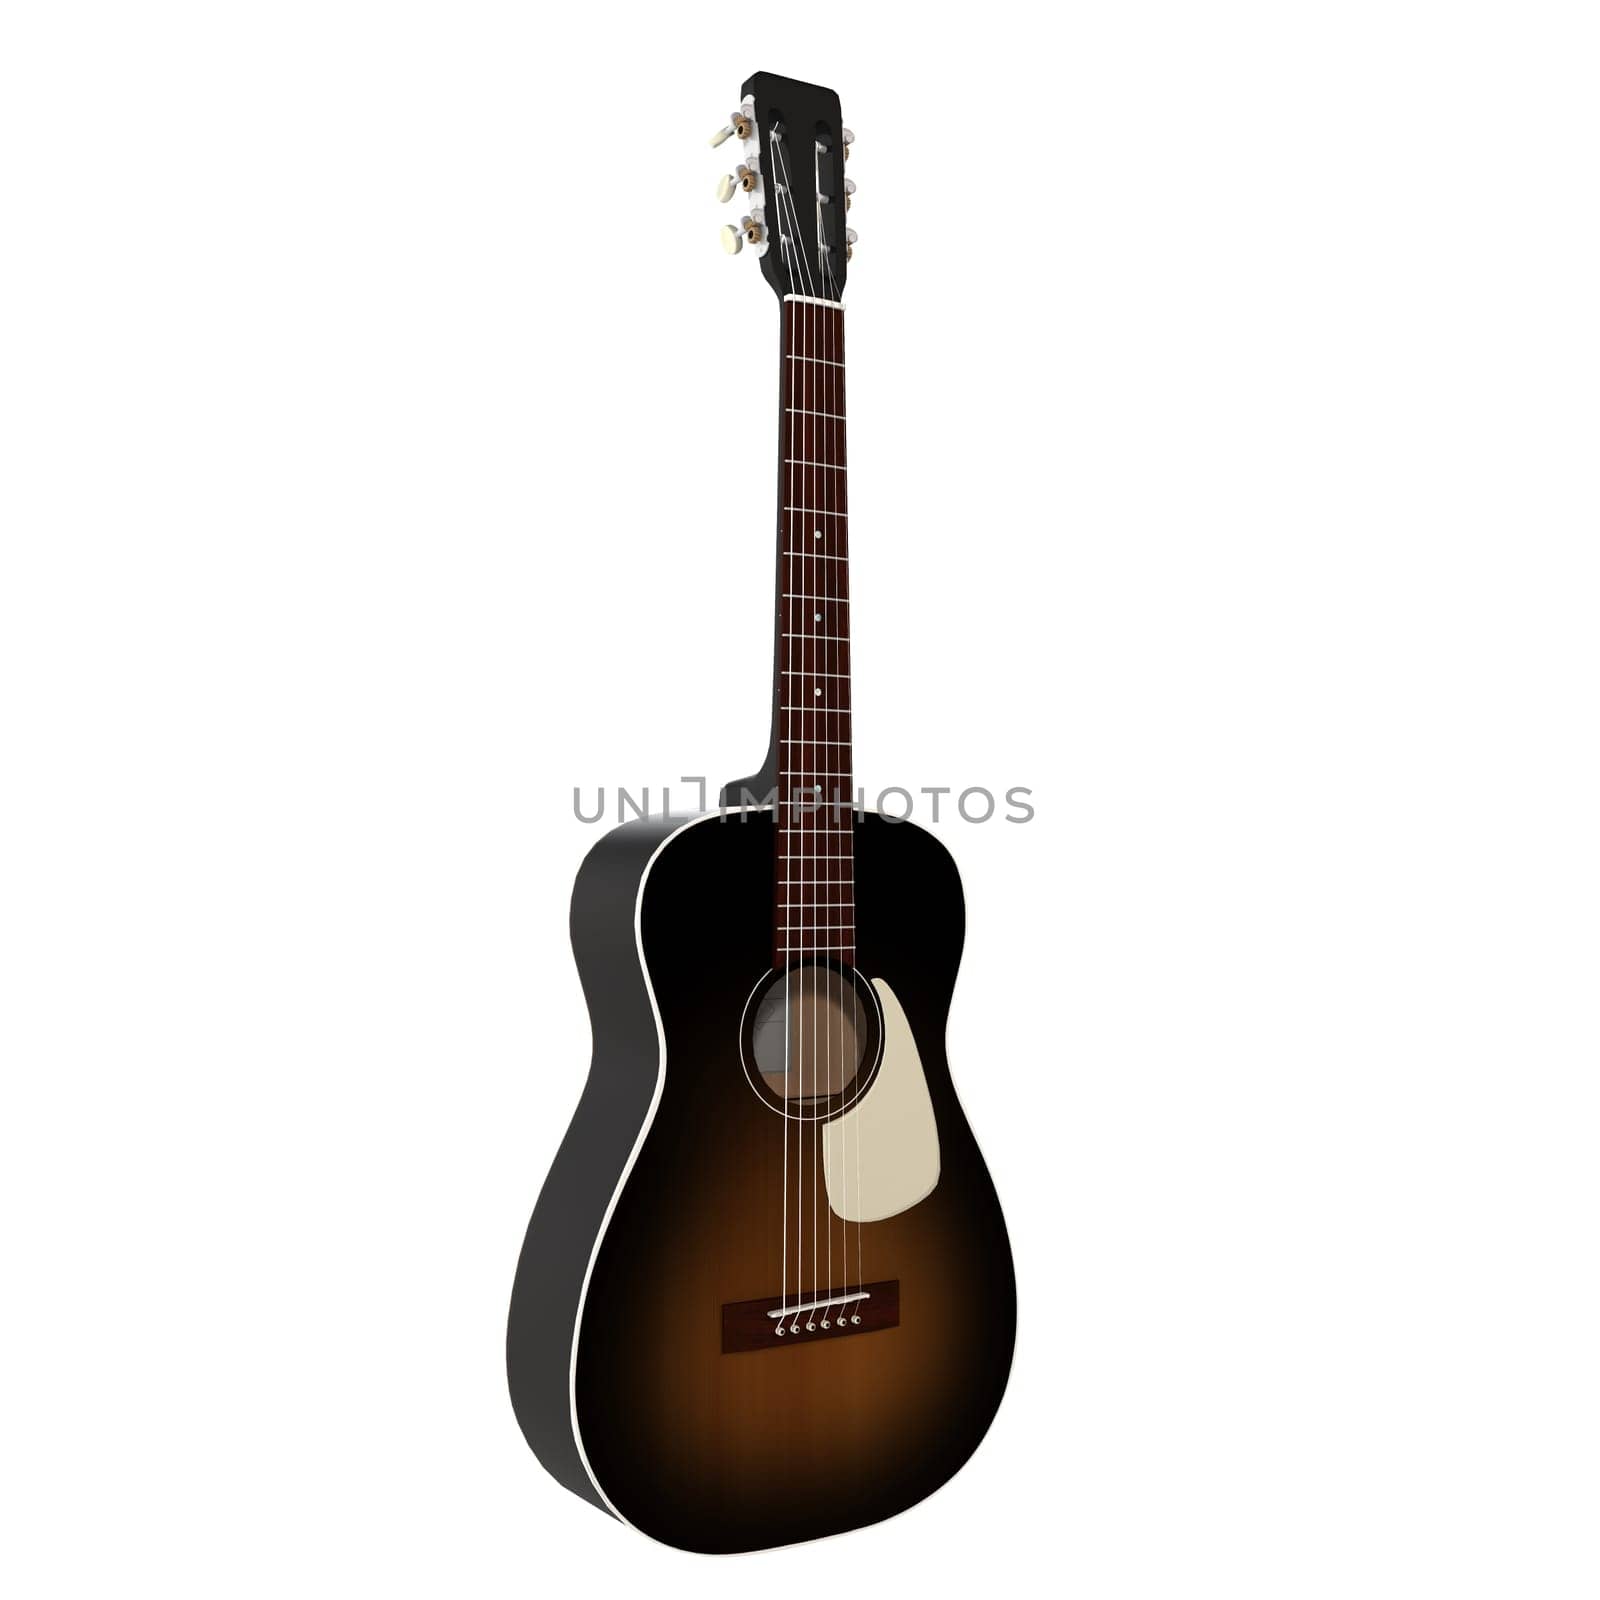 Wood Guitar isolated on white background. High quality 3d illustration